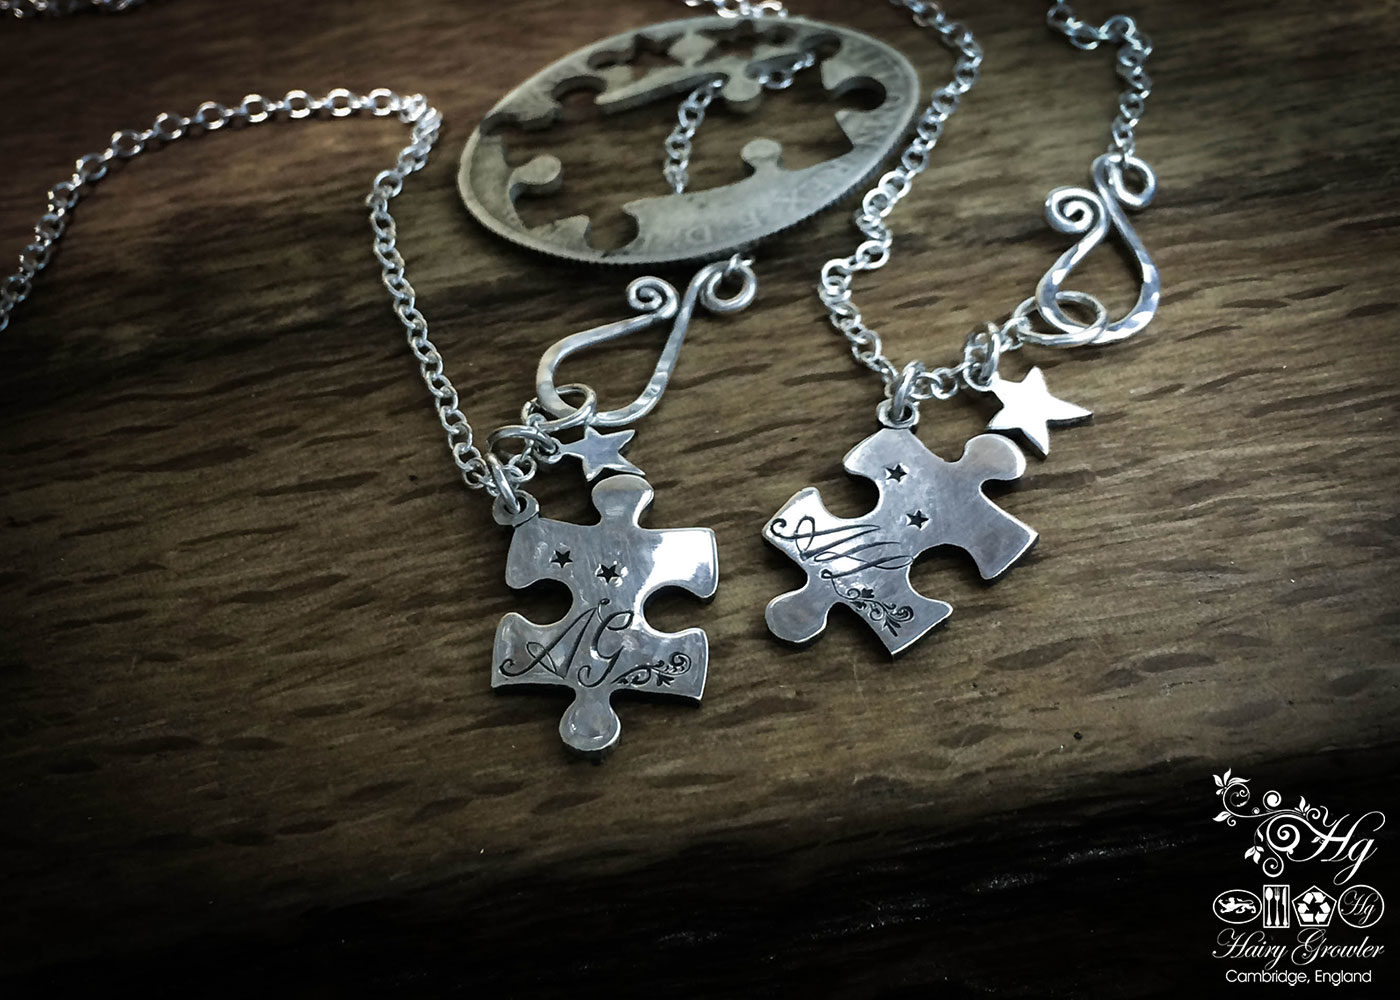 Handmade and repurposed jigsaw pieces necklace silver coin